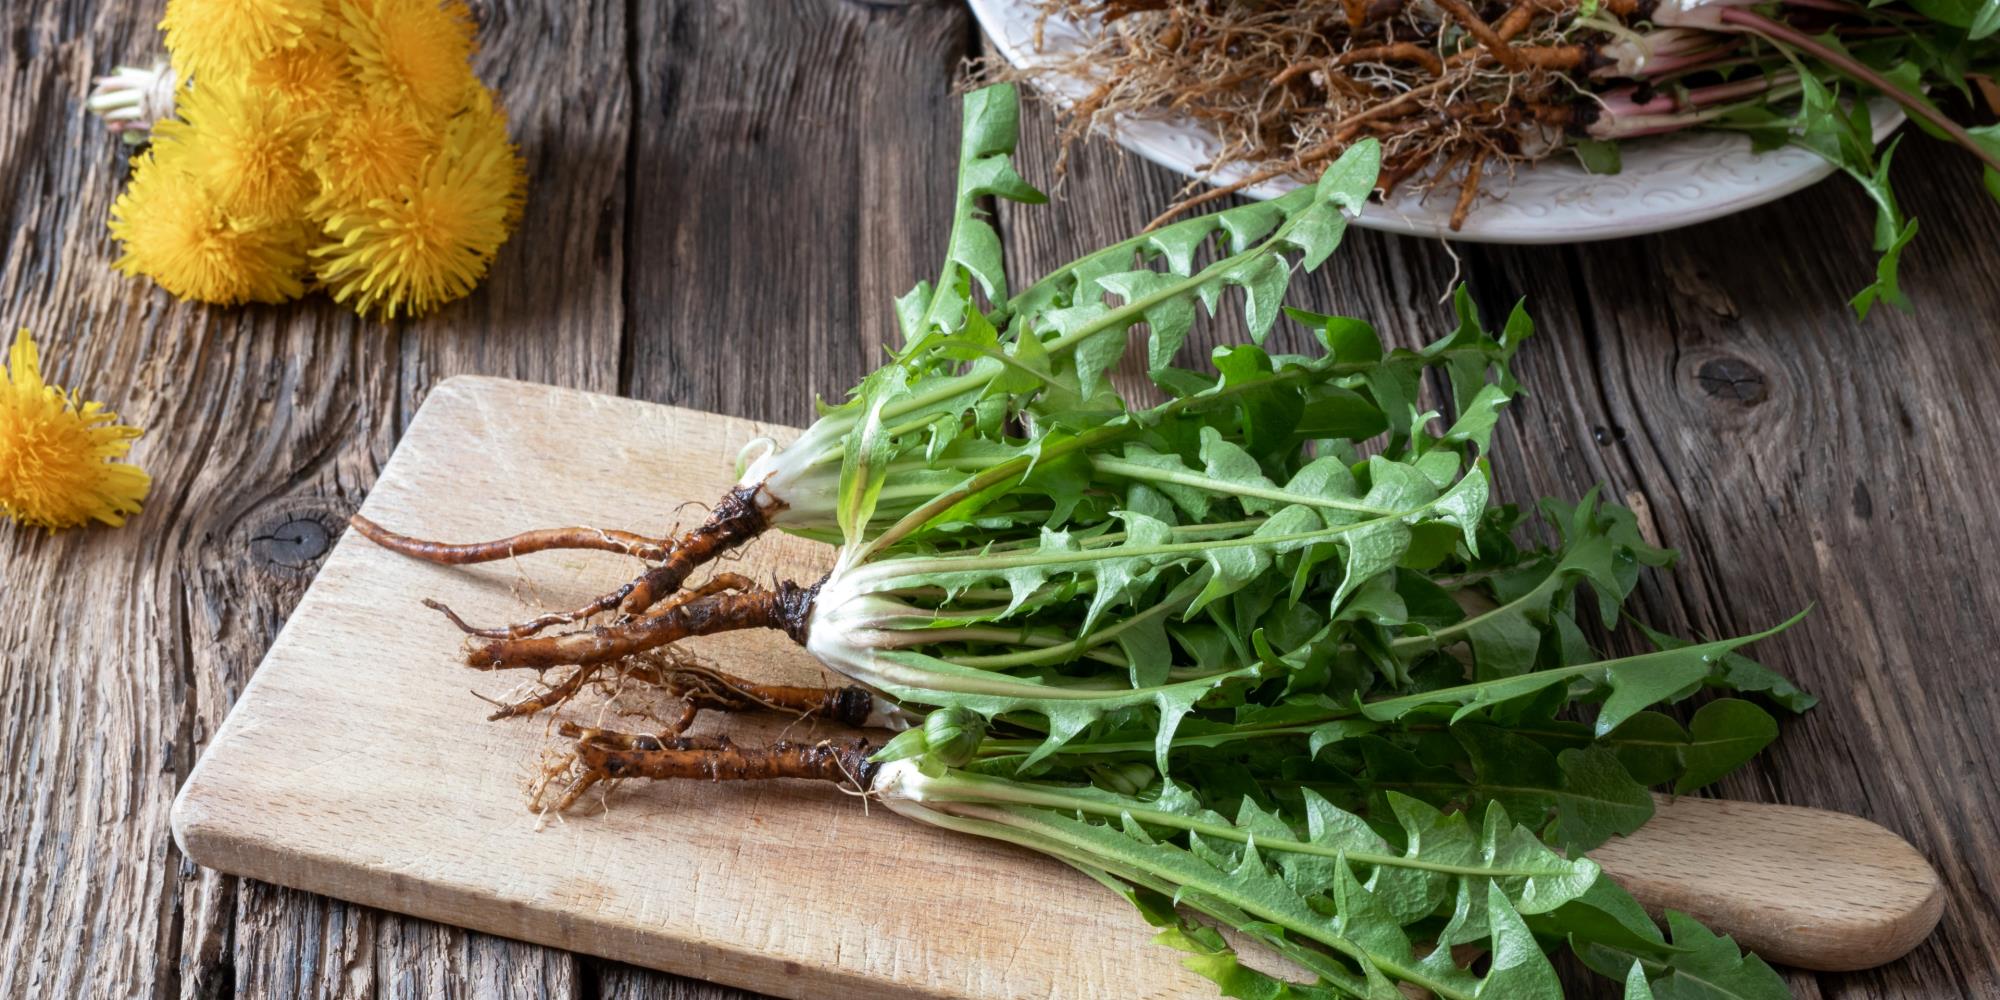 5 Early Autumn Herbs to Forage